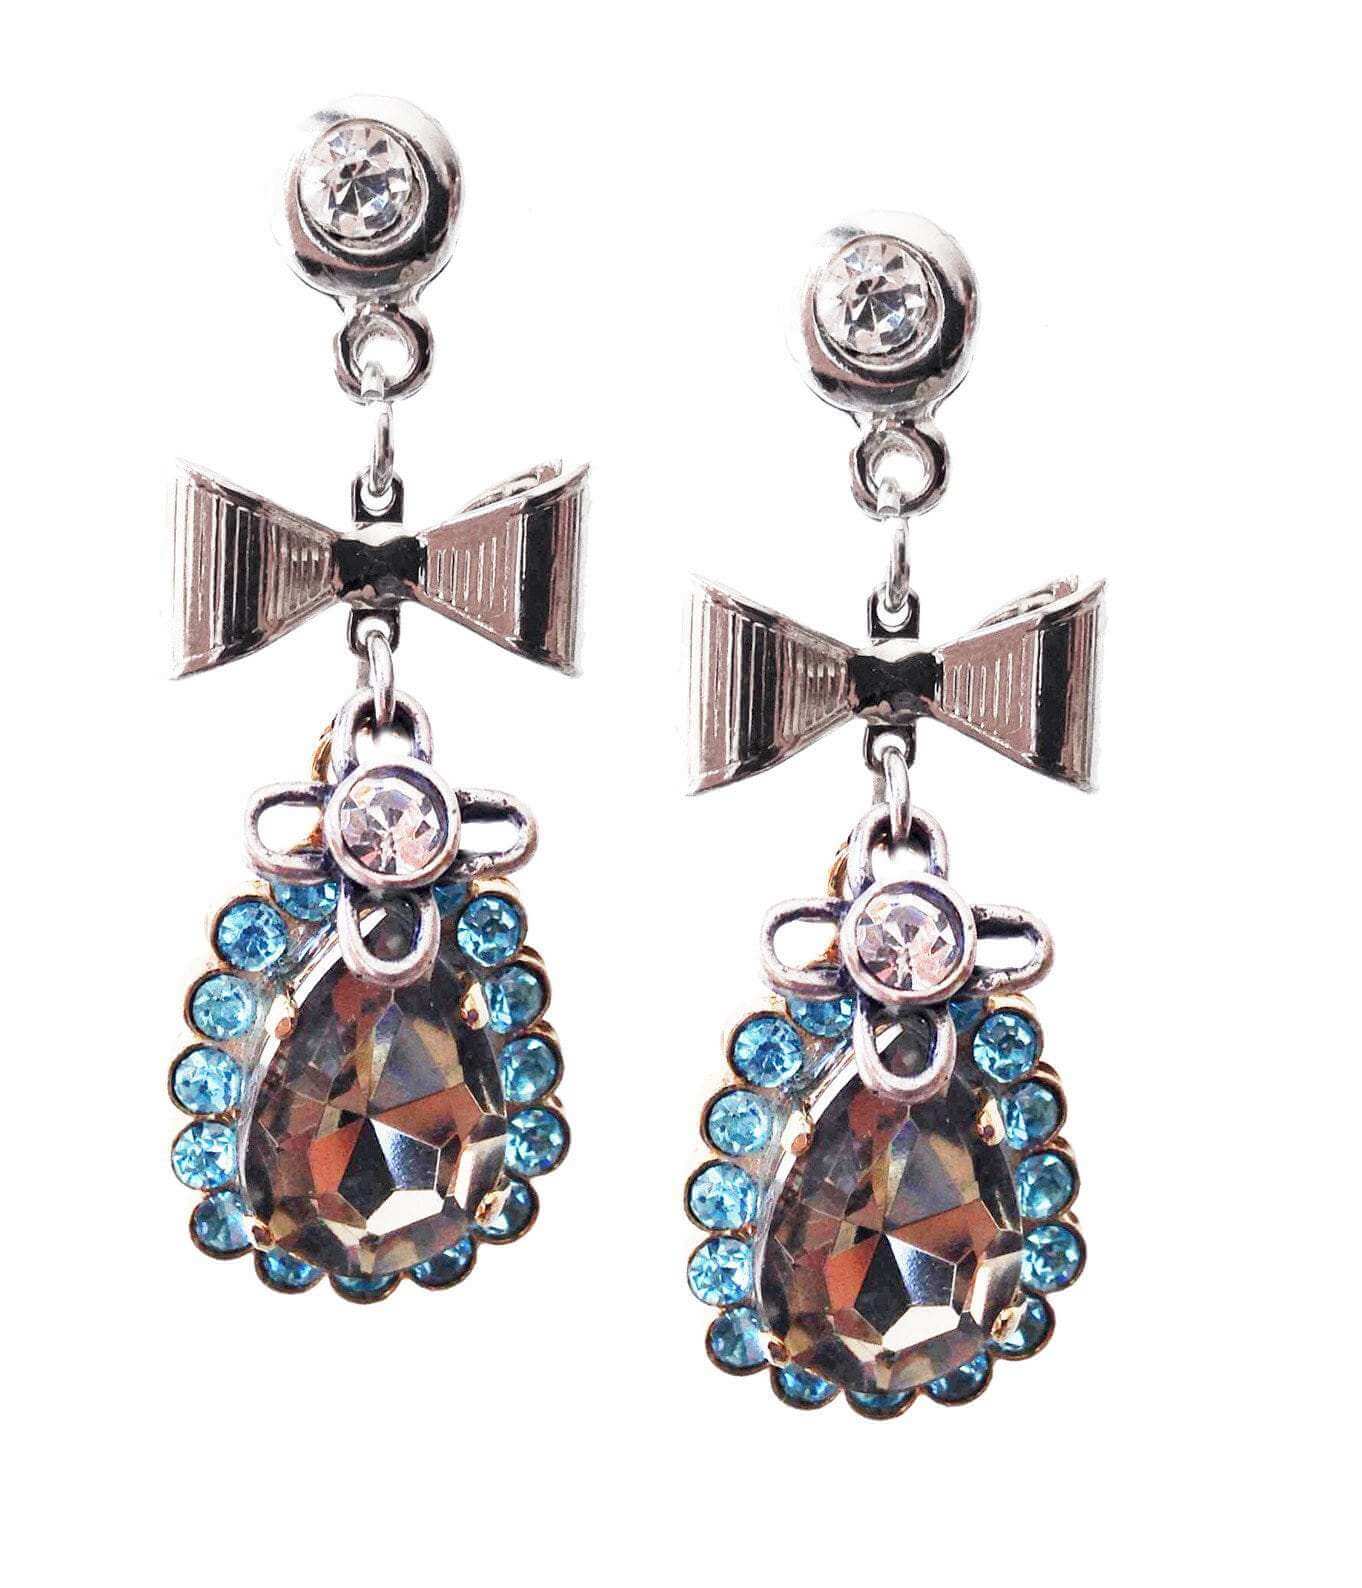 Light blue dangle and drop earrings made with Crystallized Swarovski elements and silver plated brass and small charms. - Maiden-Art